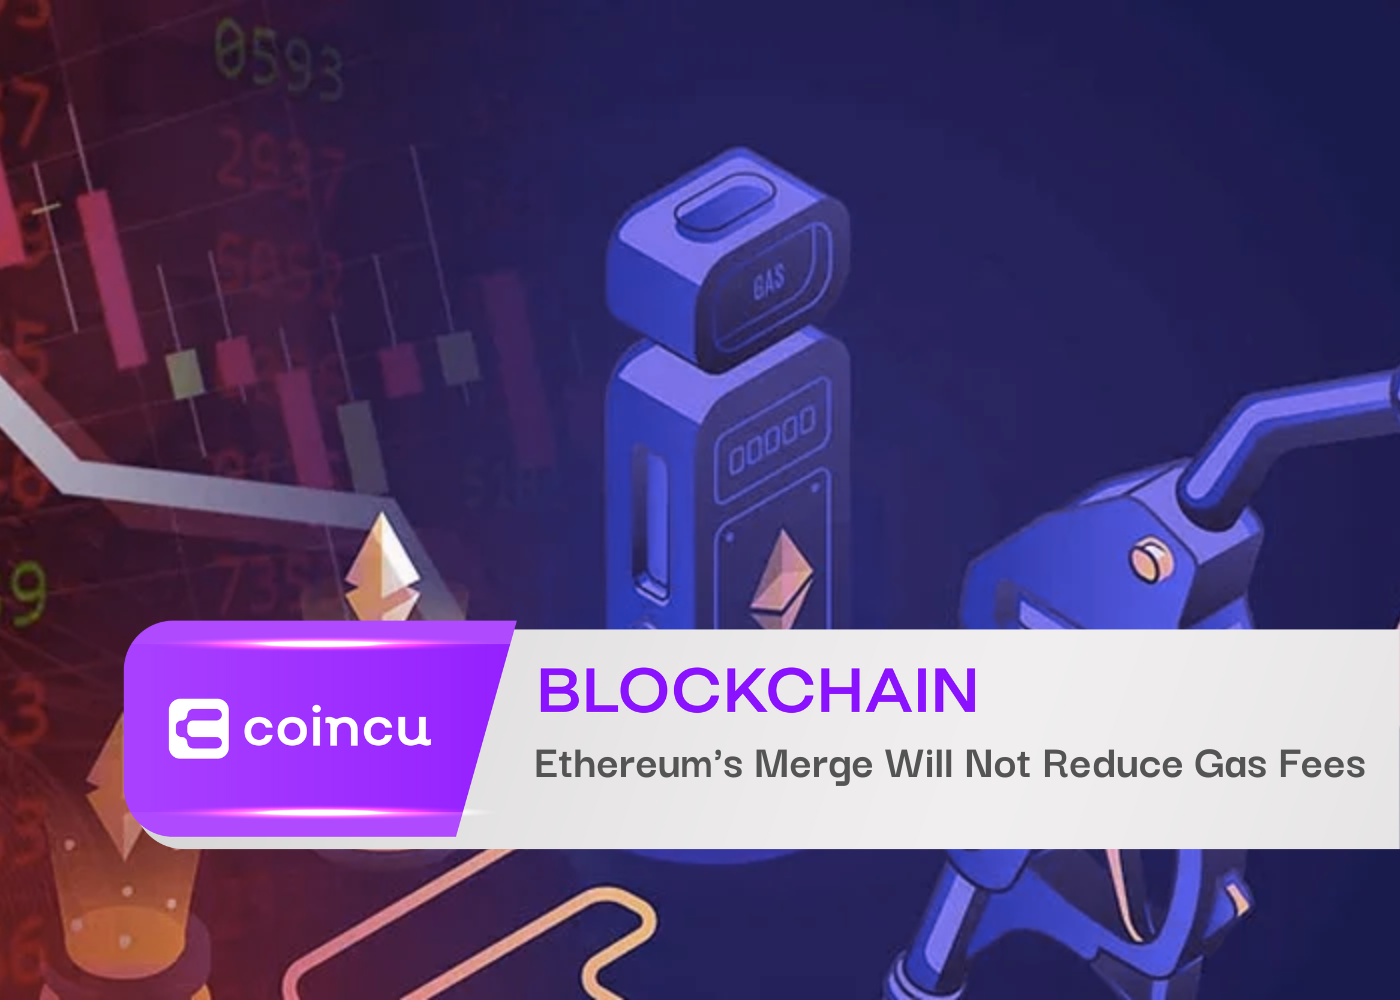 Ethereum’s Merge Will Not Reduce Gas Fees